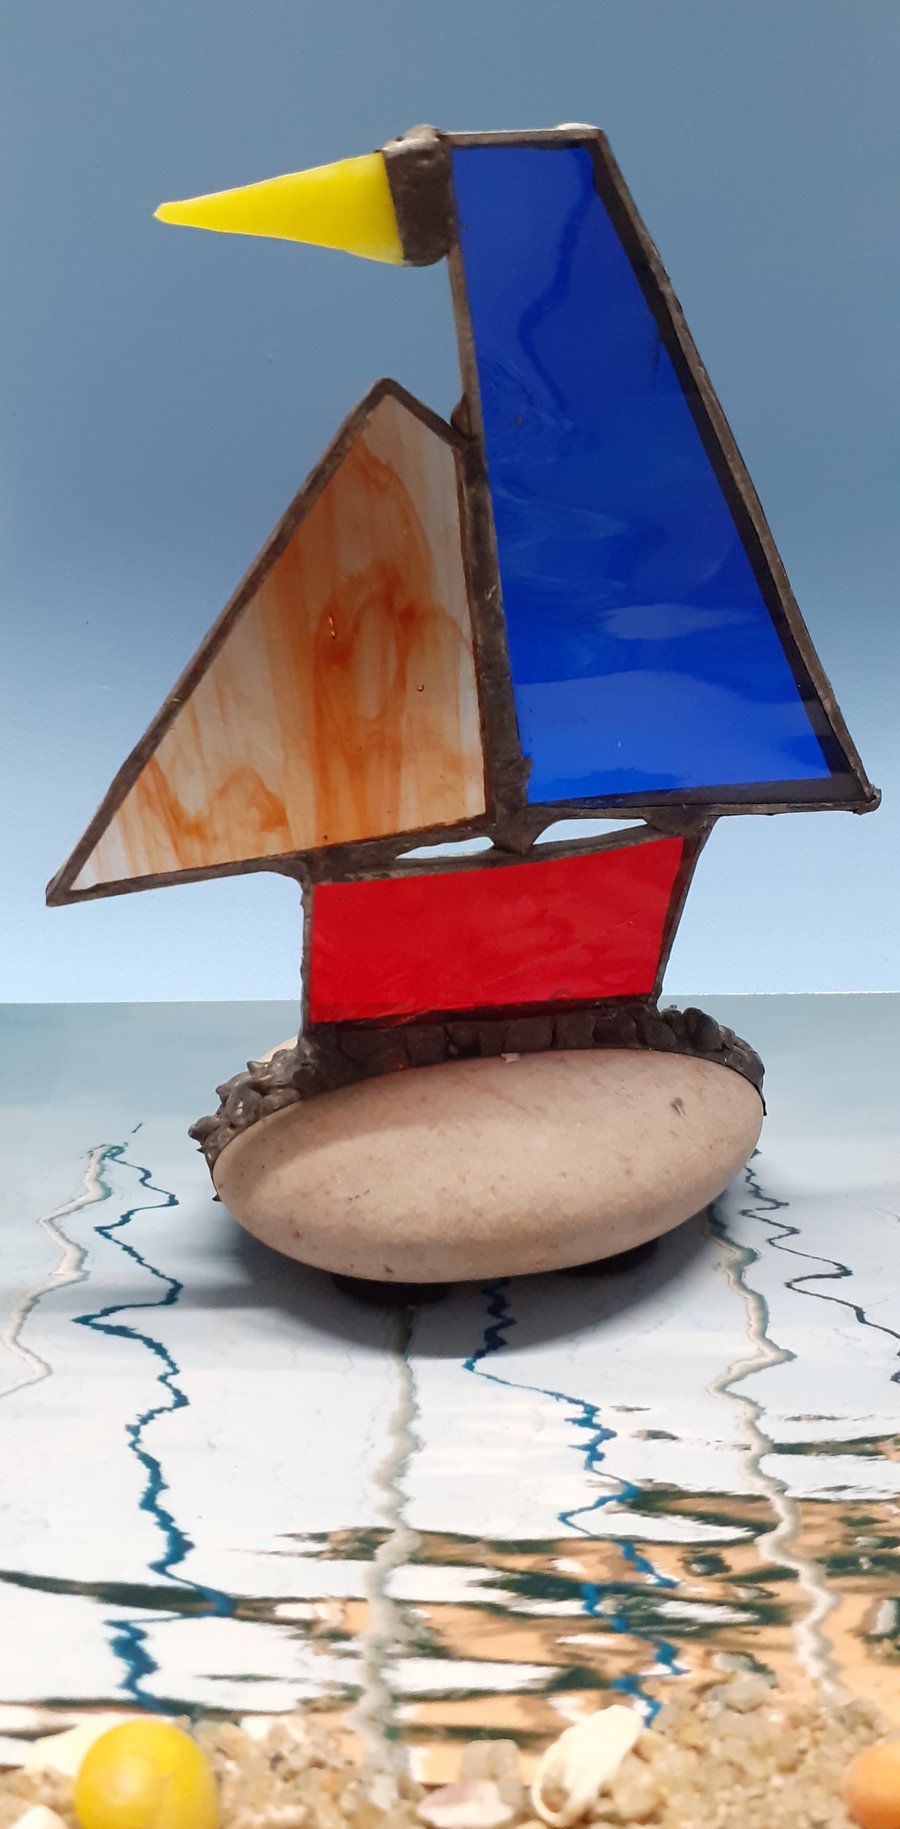 Stained glass sailing boat on pebble